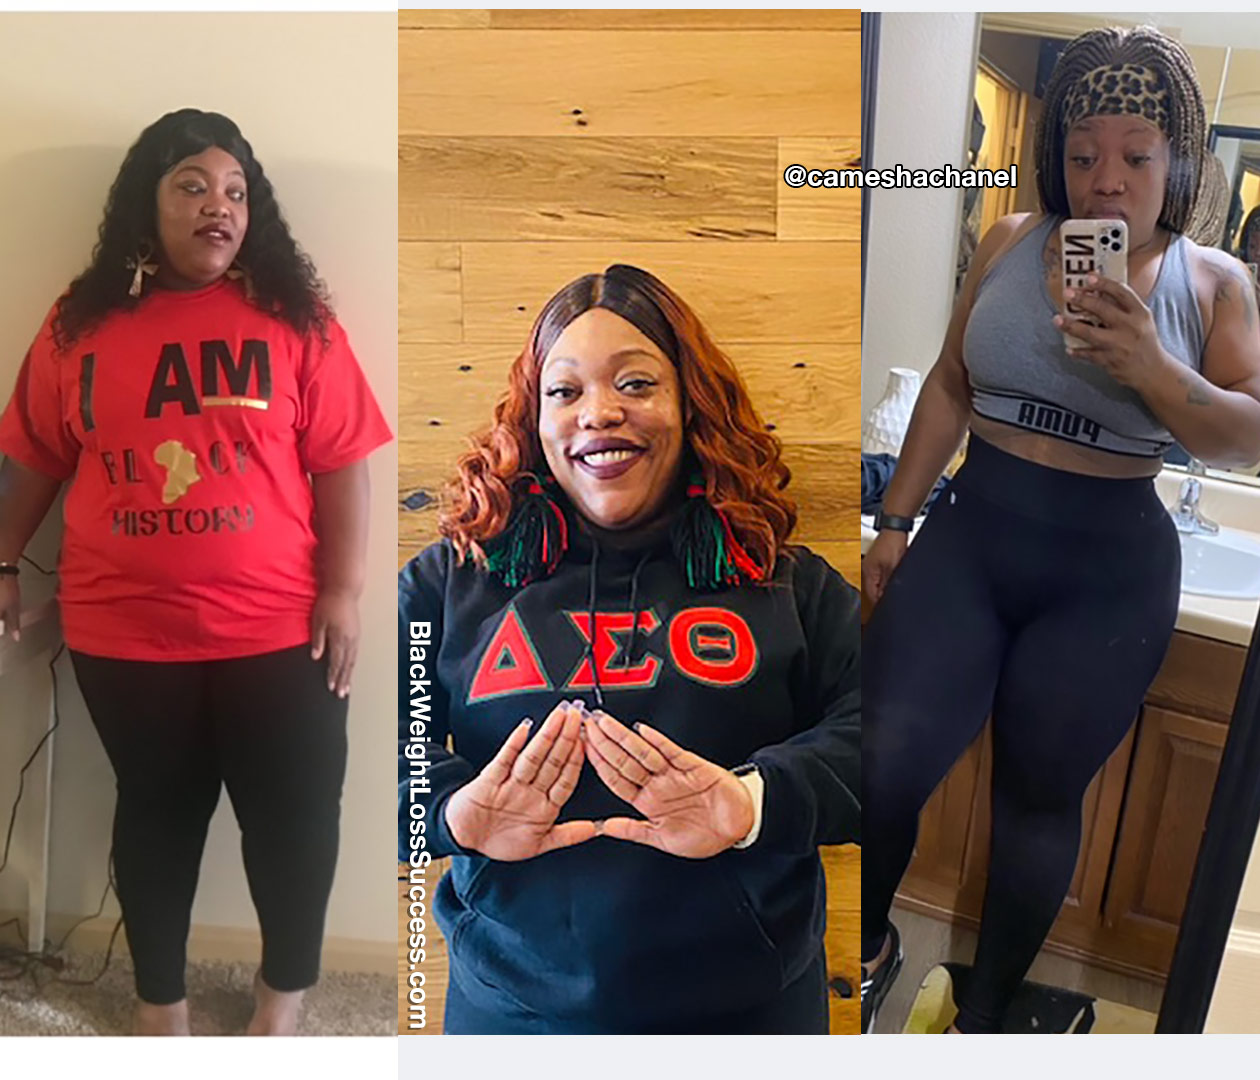 Camesha before and after weight loss